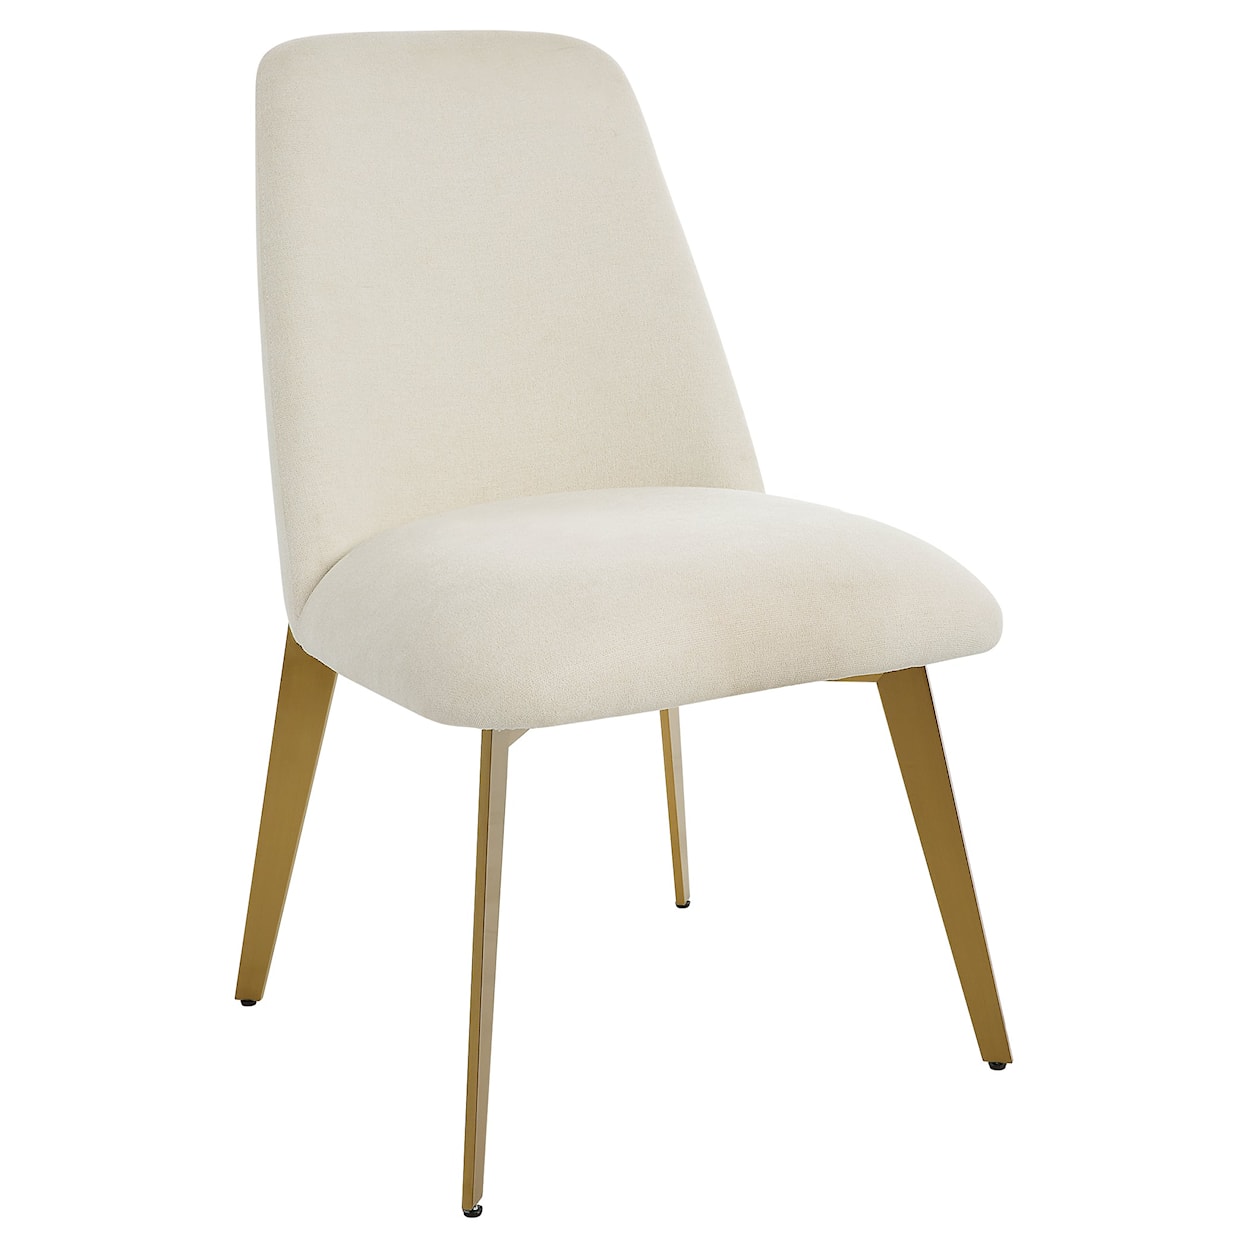 Uttermost Vantage Vantage Off White Fabric Dining Chair